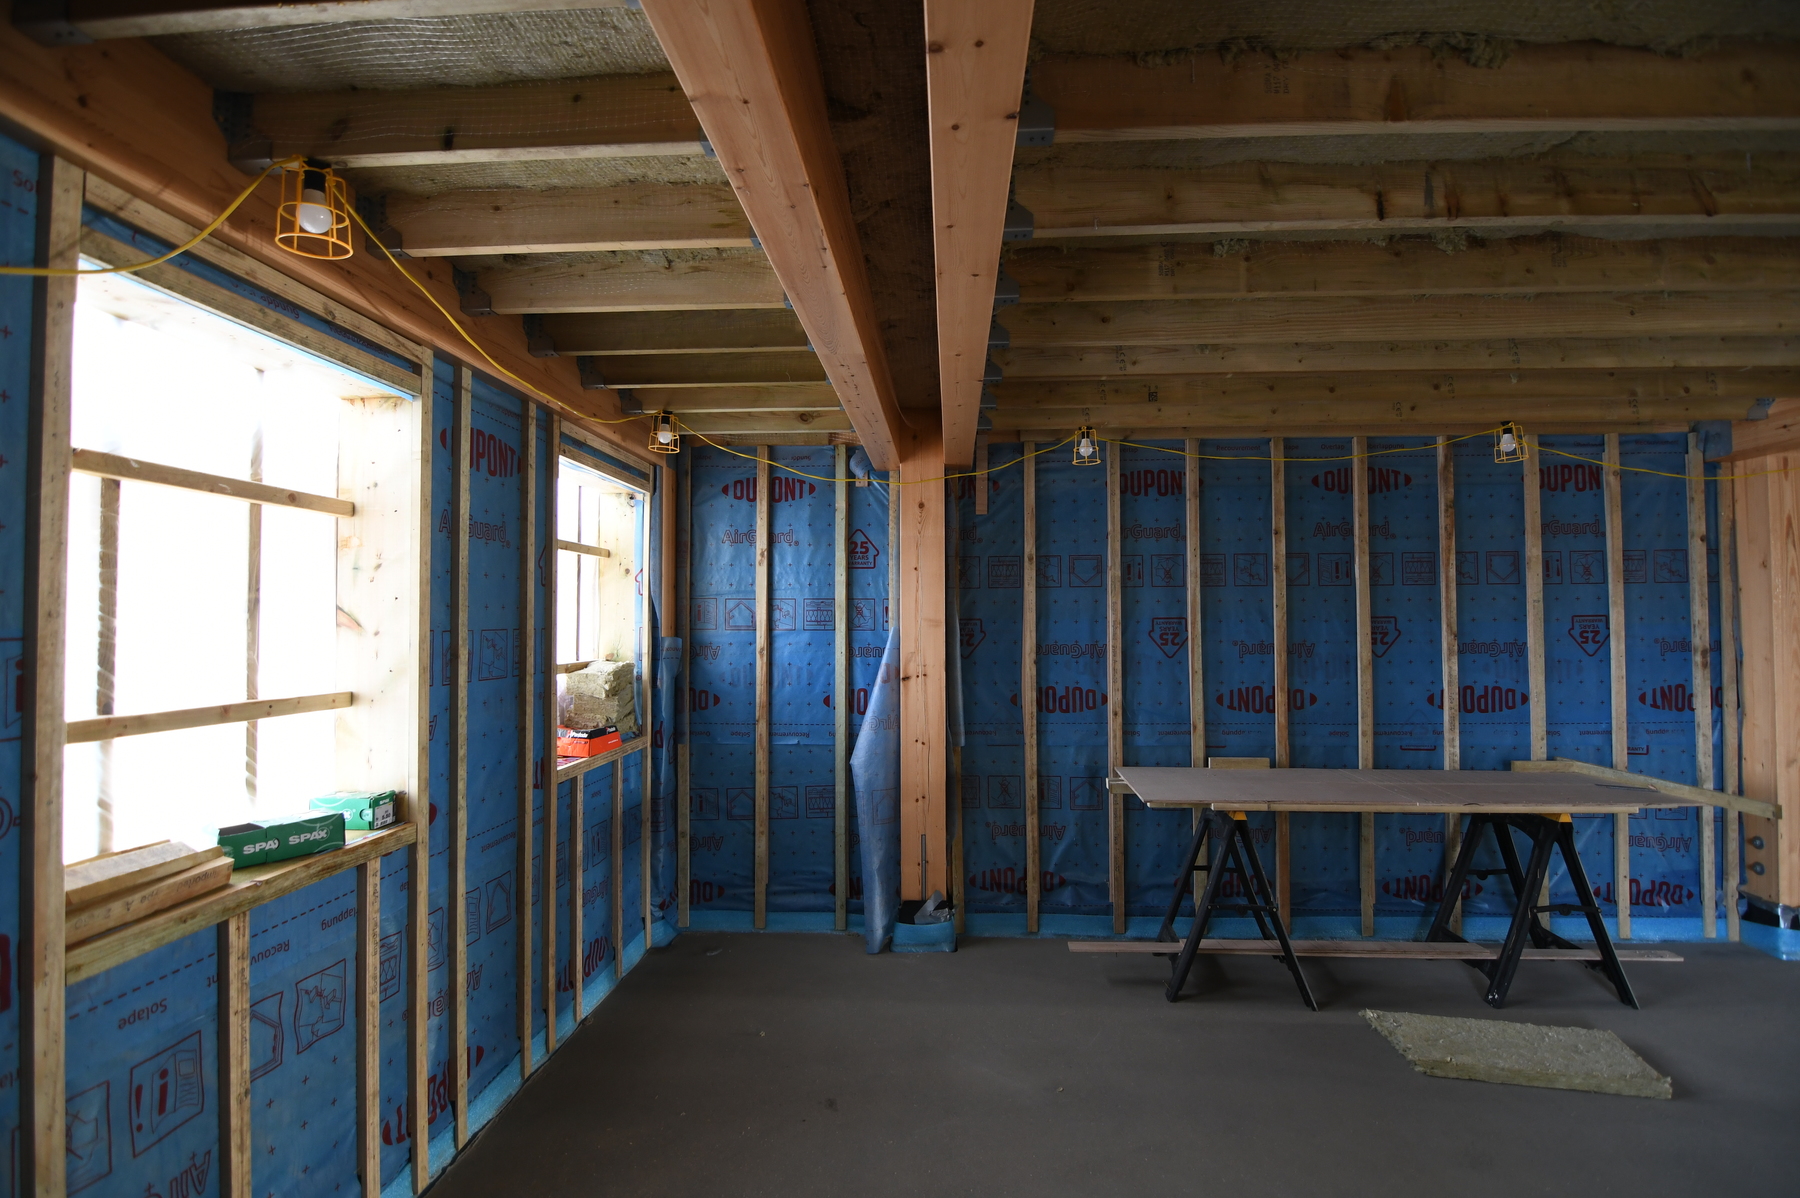 Insulating the walls with a layer to prevent heat loss and air leakage